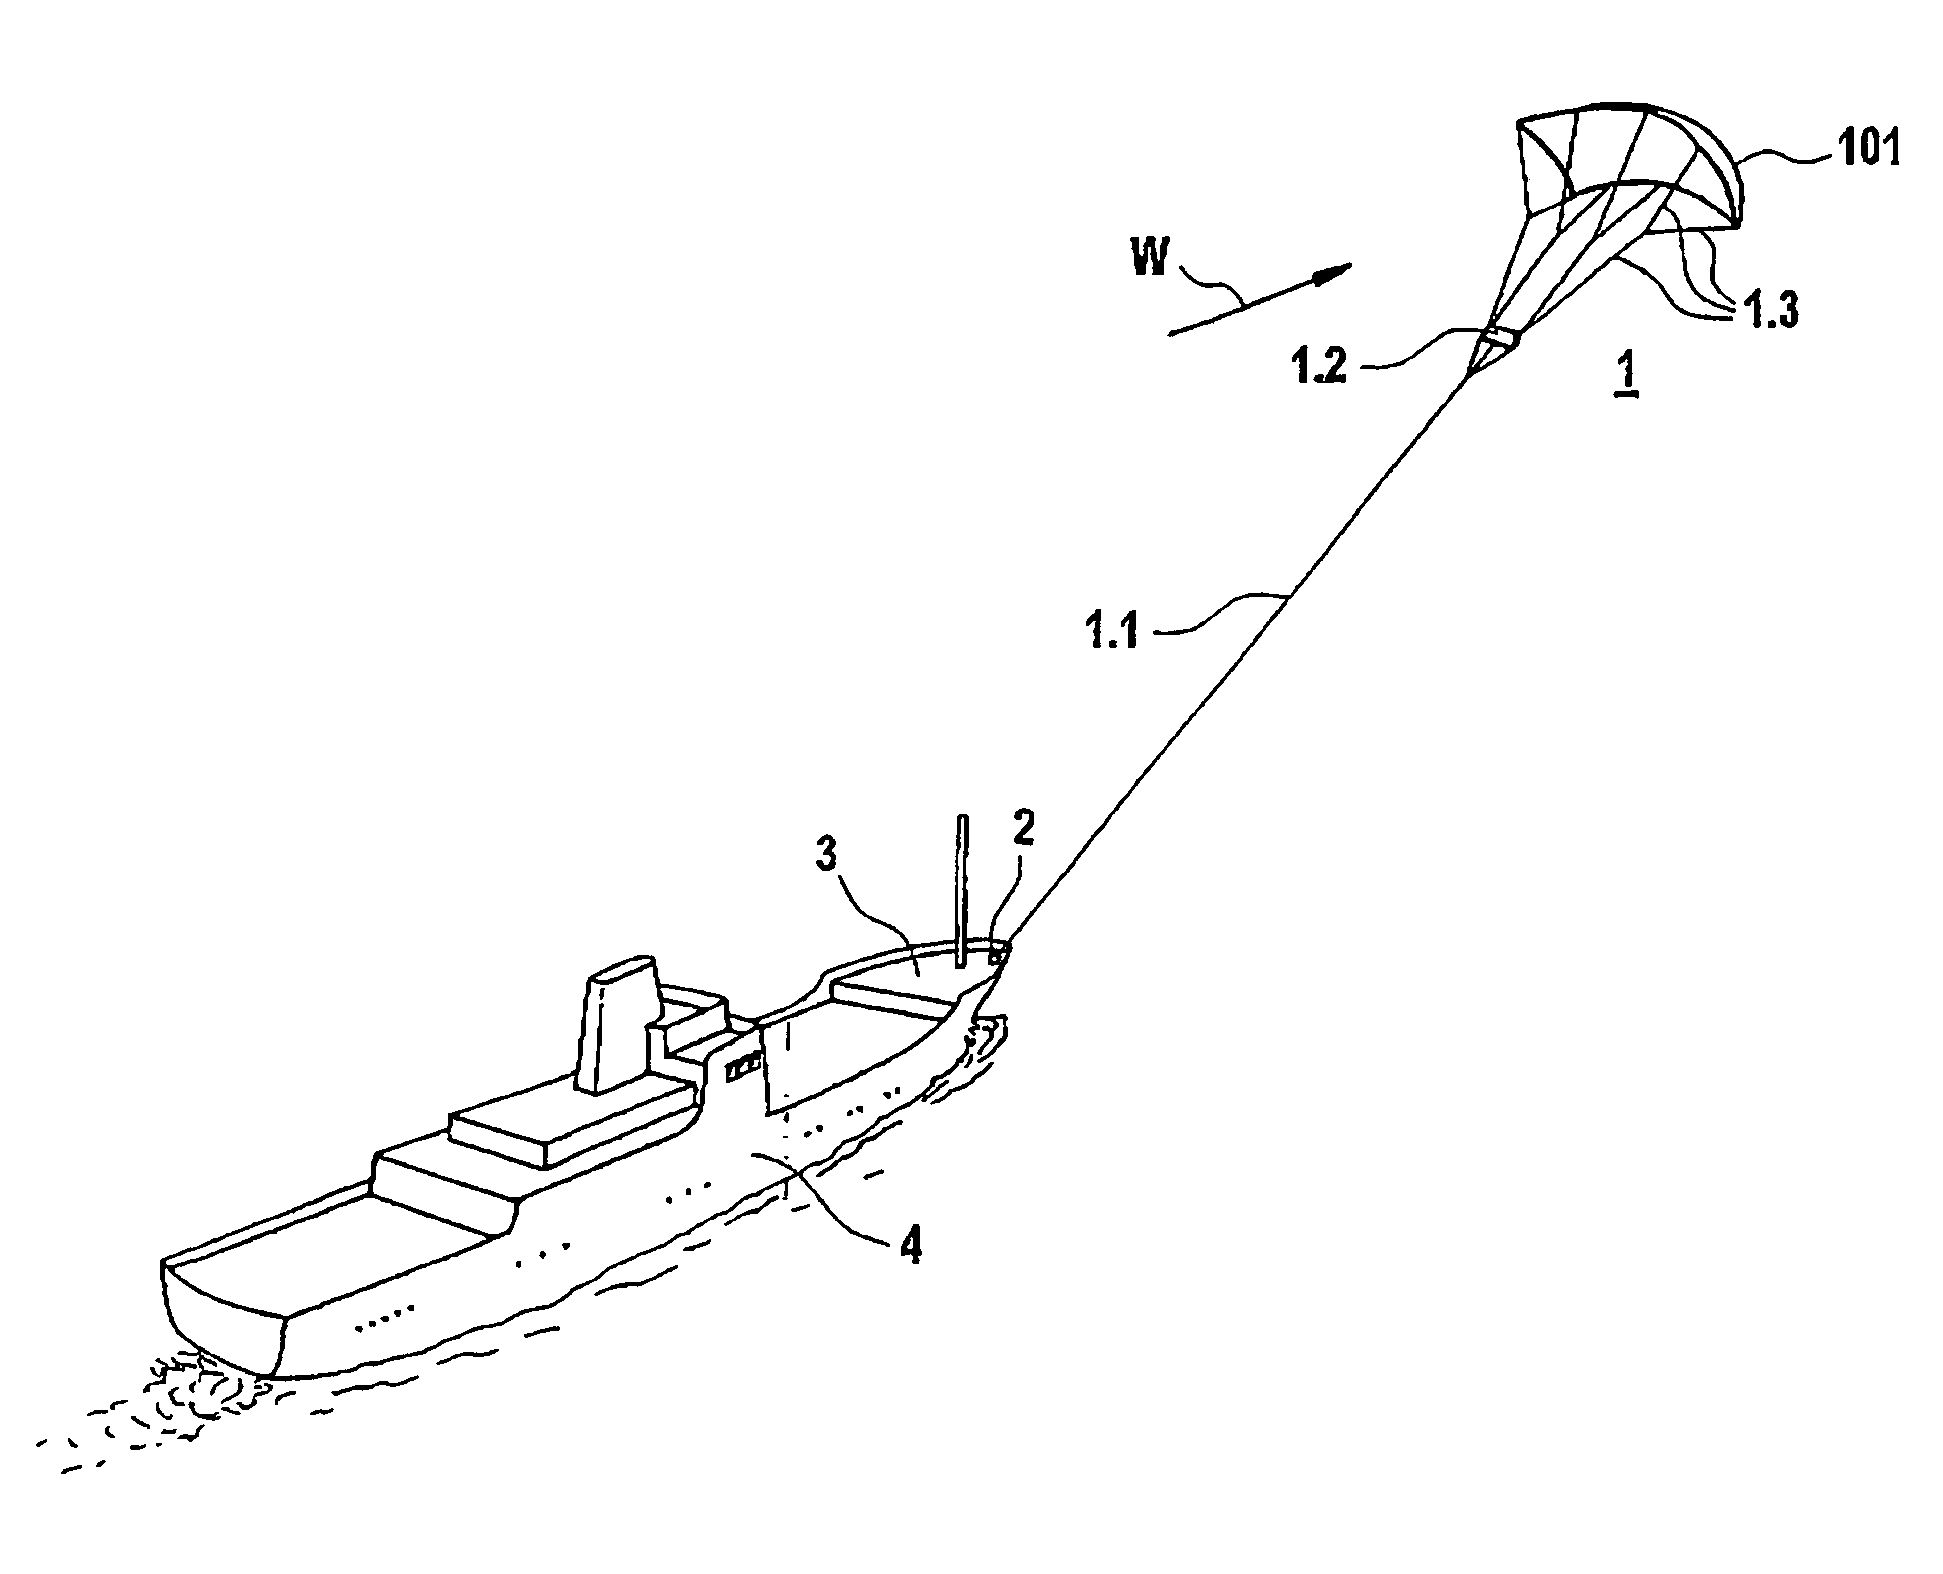 Watercraft Comprising a Free-Flying Kite-Type Wind-Attacked Element as a Wind-Powered Drive Unit